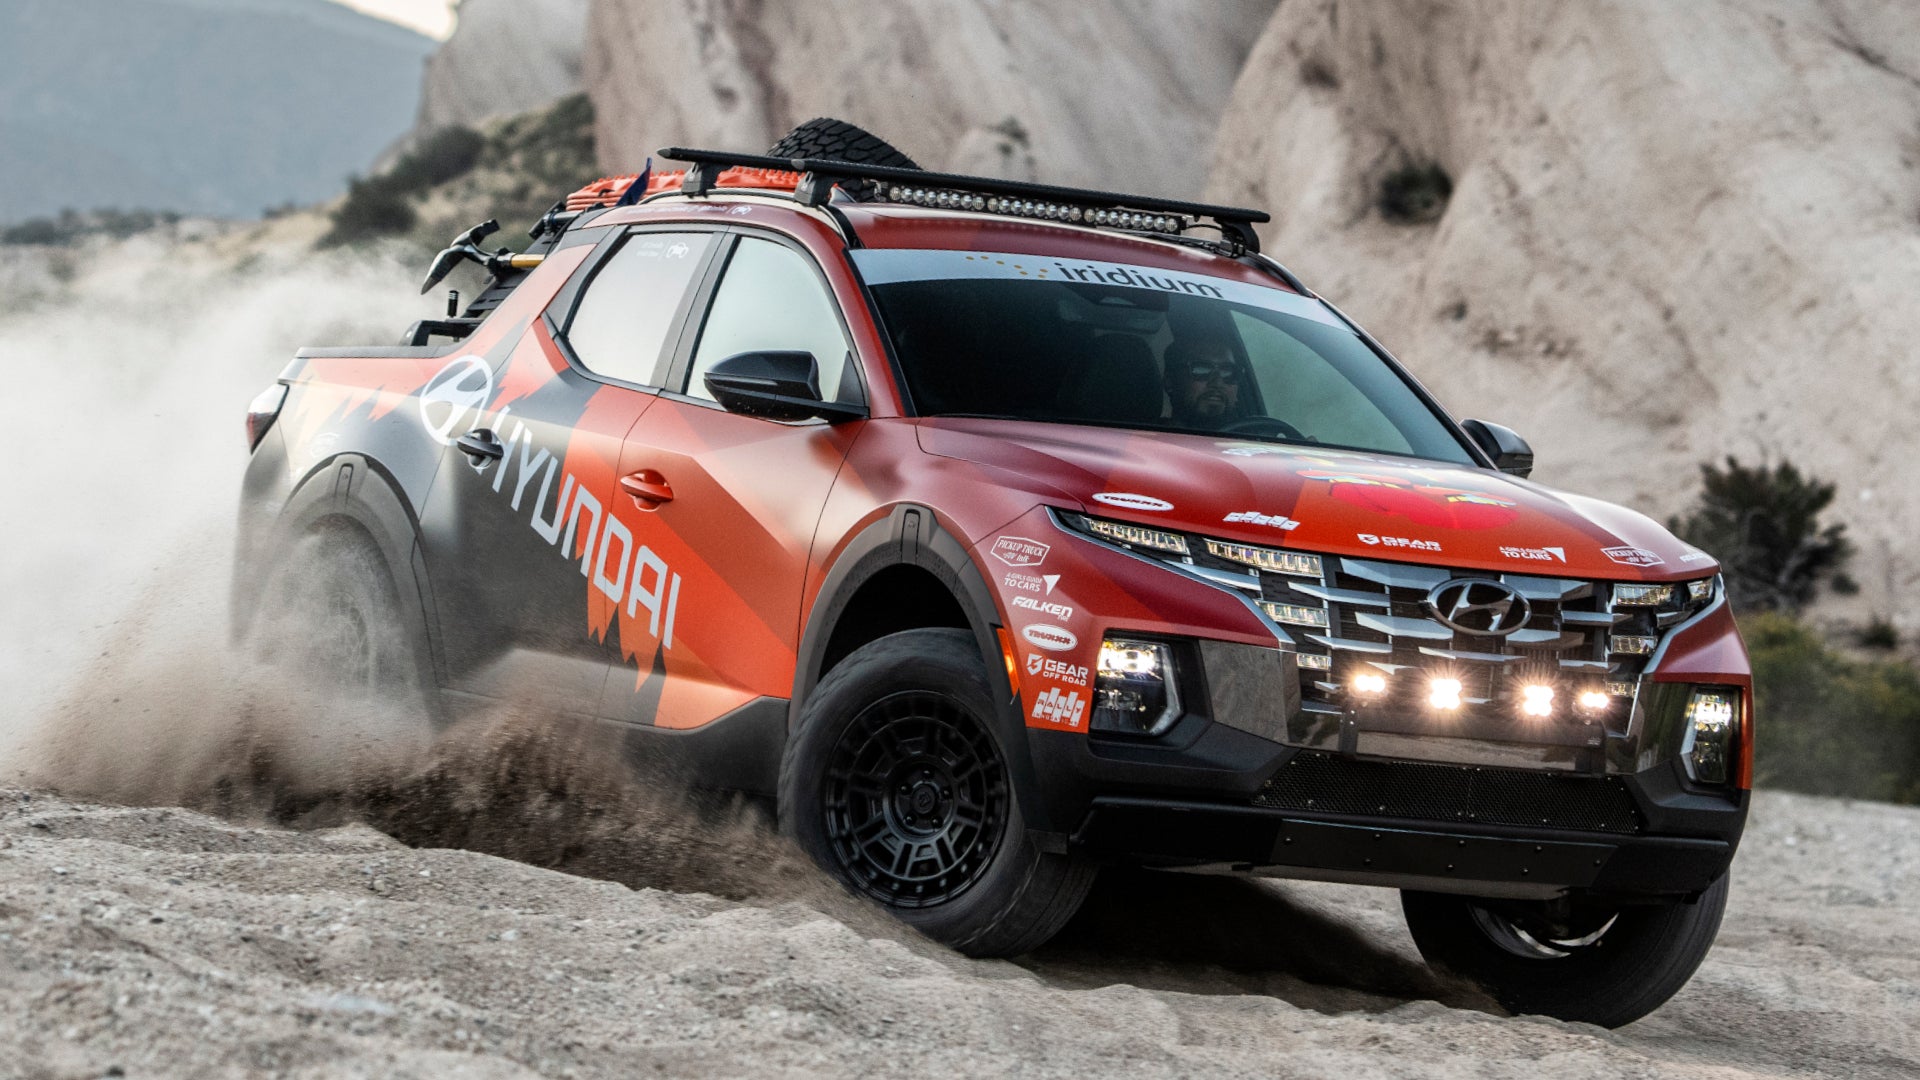 The Hyundai Santa Cruz receives ‘subtle’ modifications for better off-road performance in preparation for the renowned Rebelle Rally.